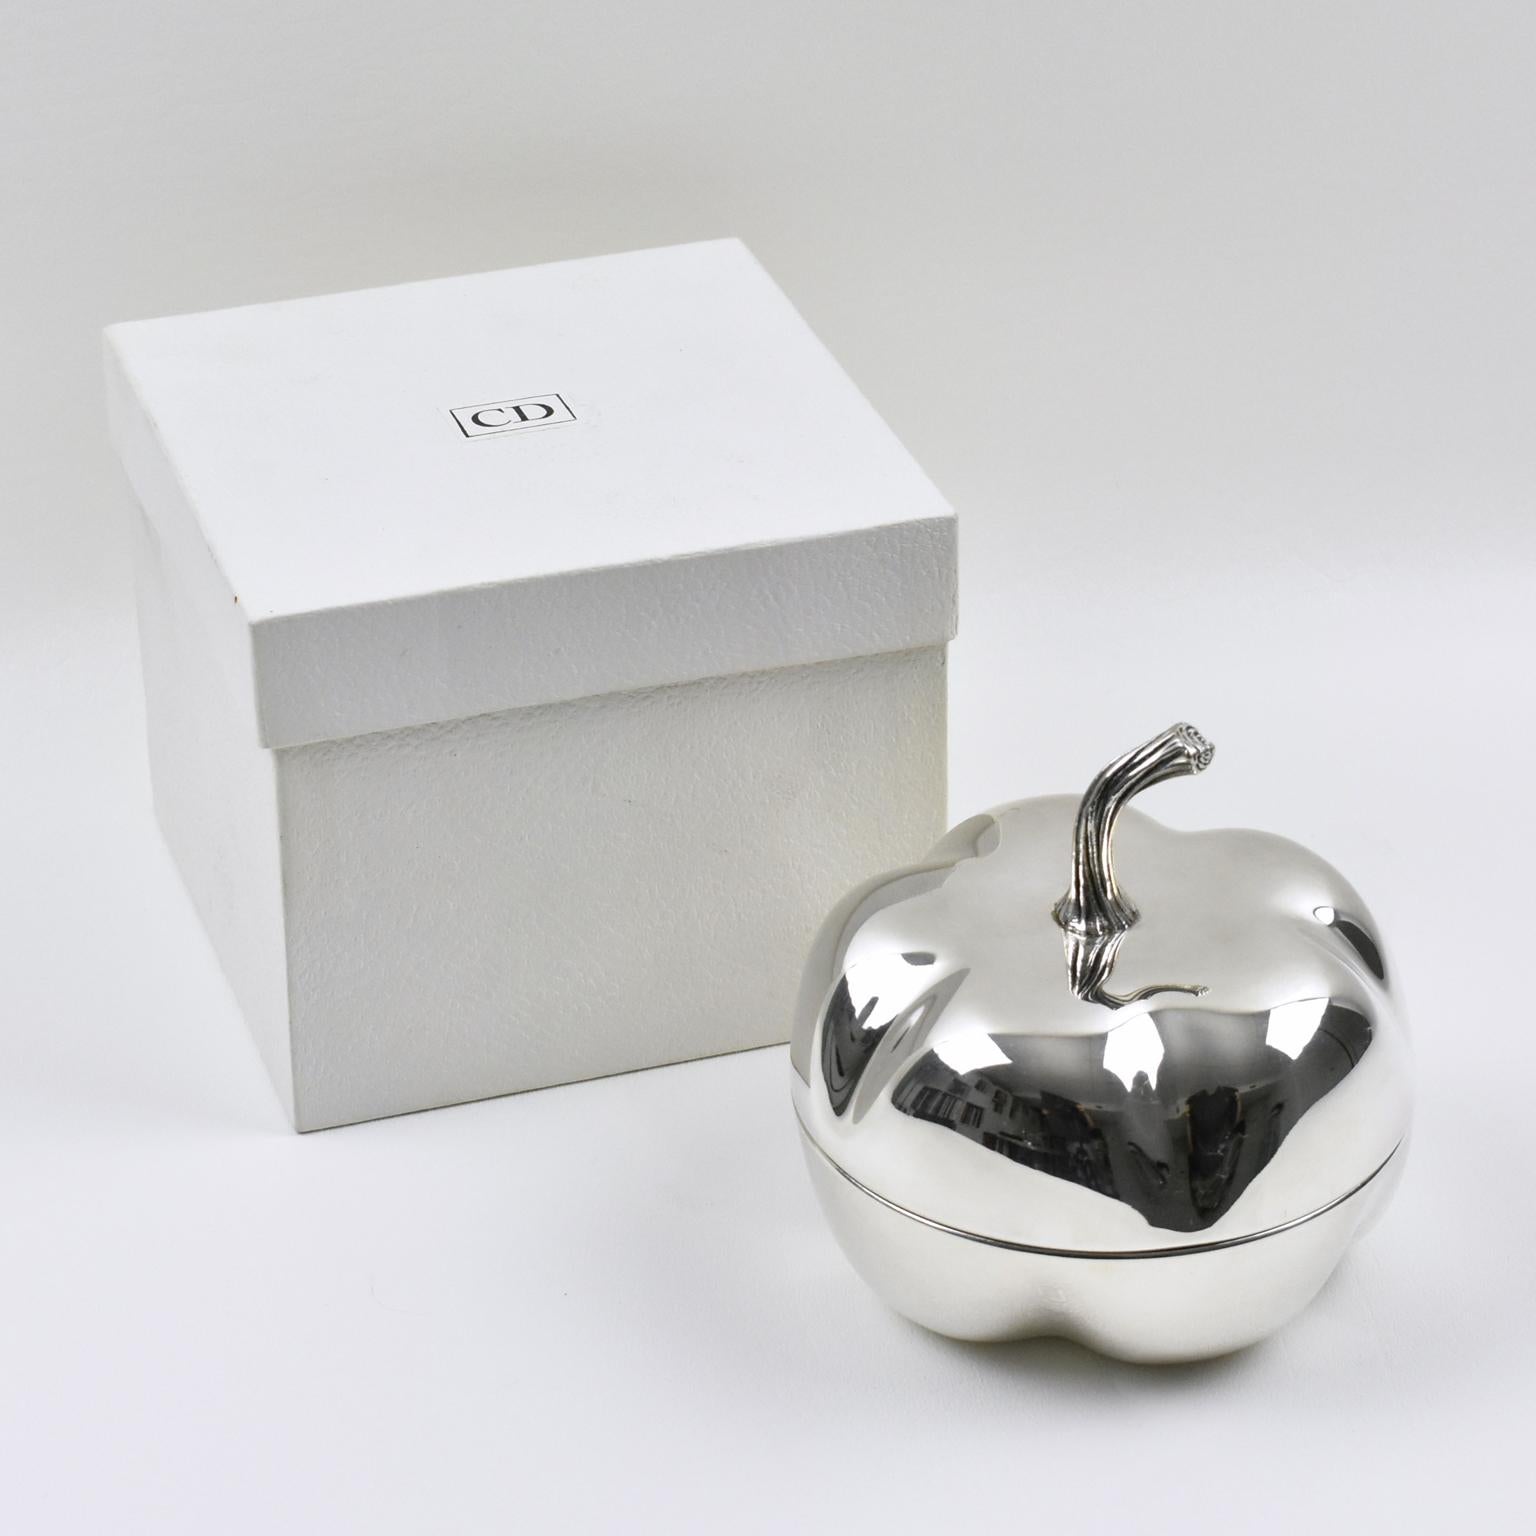 Elegant pumpkin shaped decorative box designed by Christian Dior for his 1970s Home collection. This lovely decorative lidded box is made of silver plated metal with nicely shaped design. Marked underside and engraved on side 'Christian Dior'.
Will